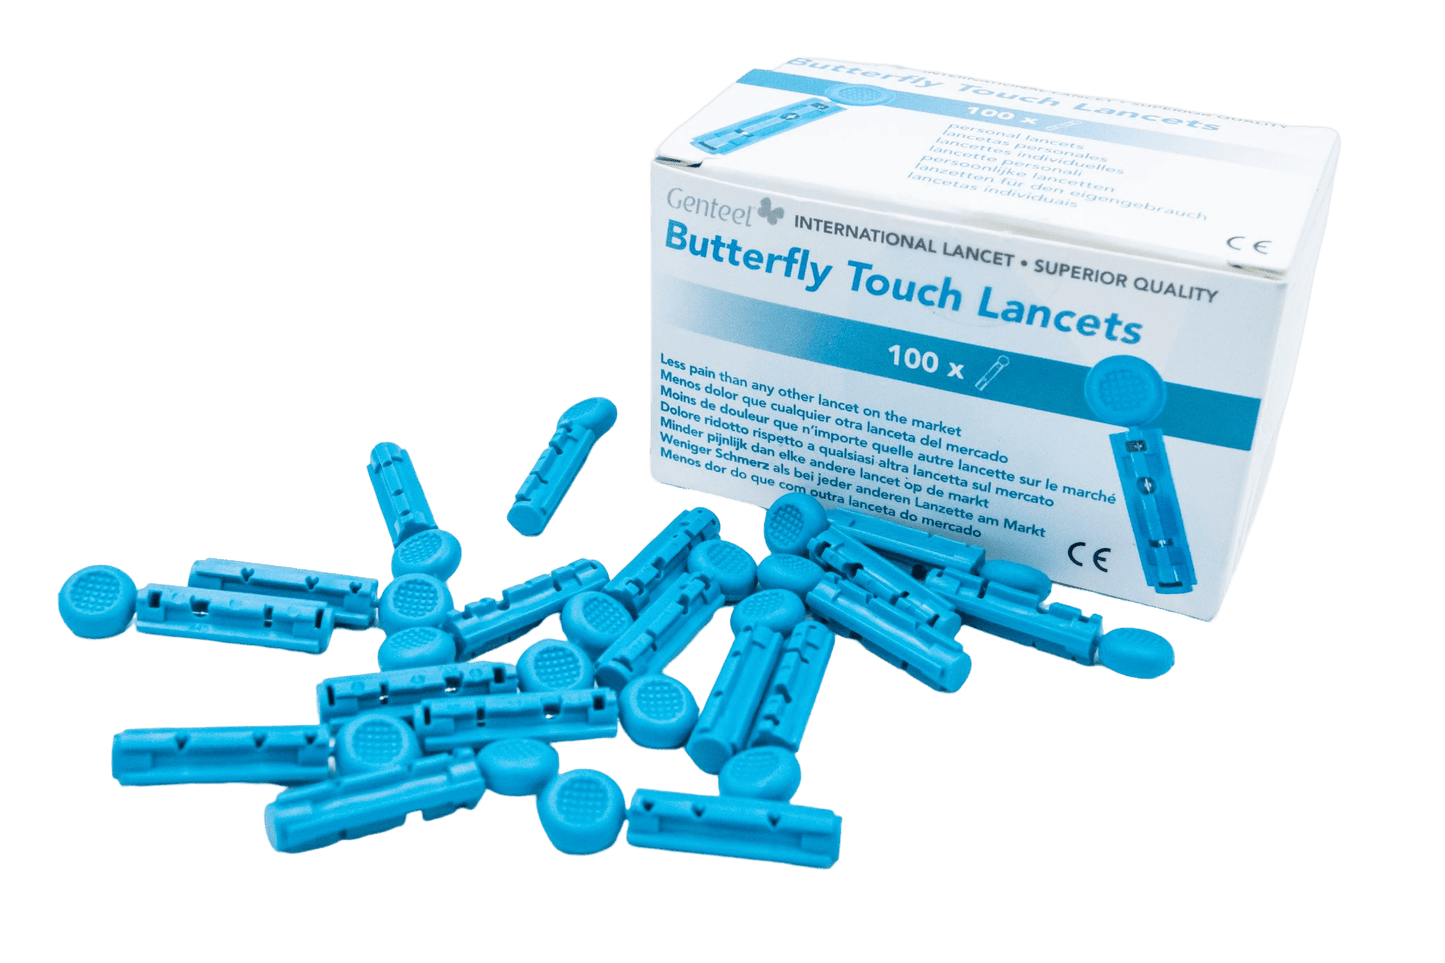 Butterfly Touch Lancets (100 stuks)